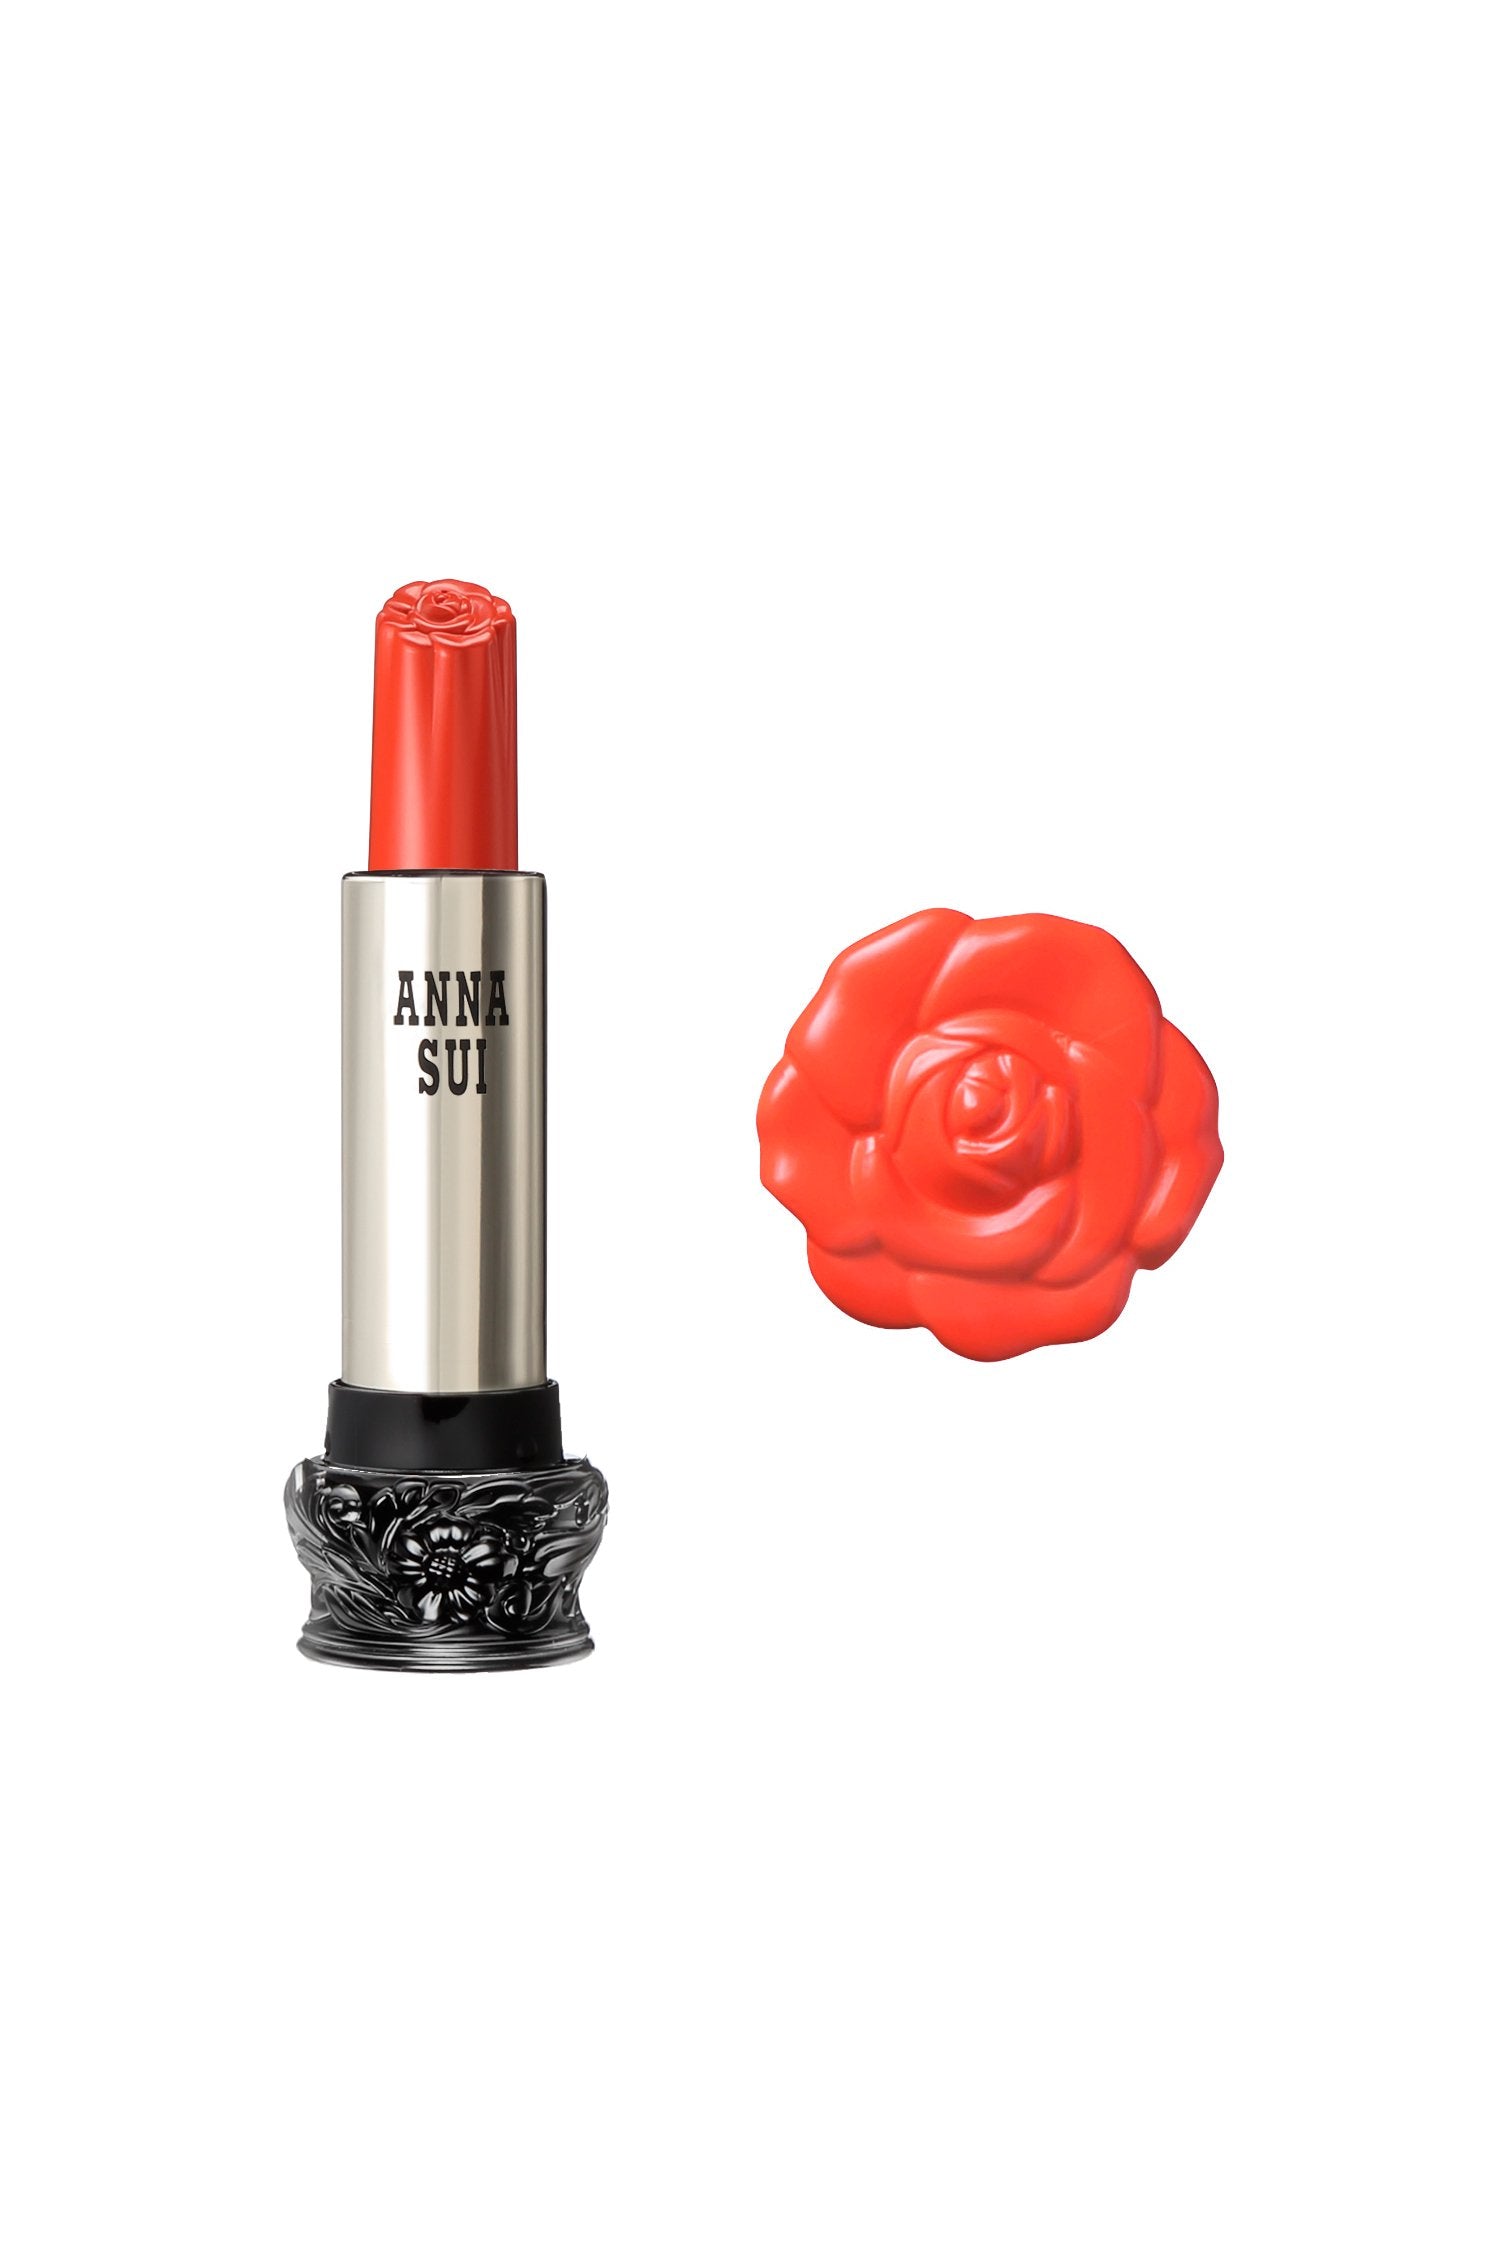 602 - Bright Marigold Lipstick F: Fairy Flower, in a cylindrical container, large black base, engraved floral design, metallic body